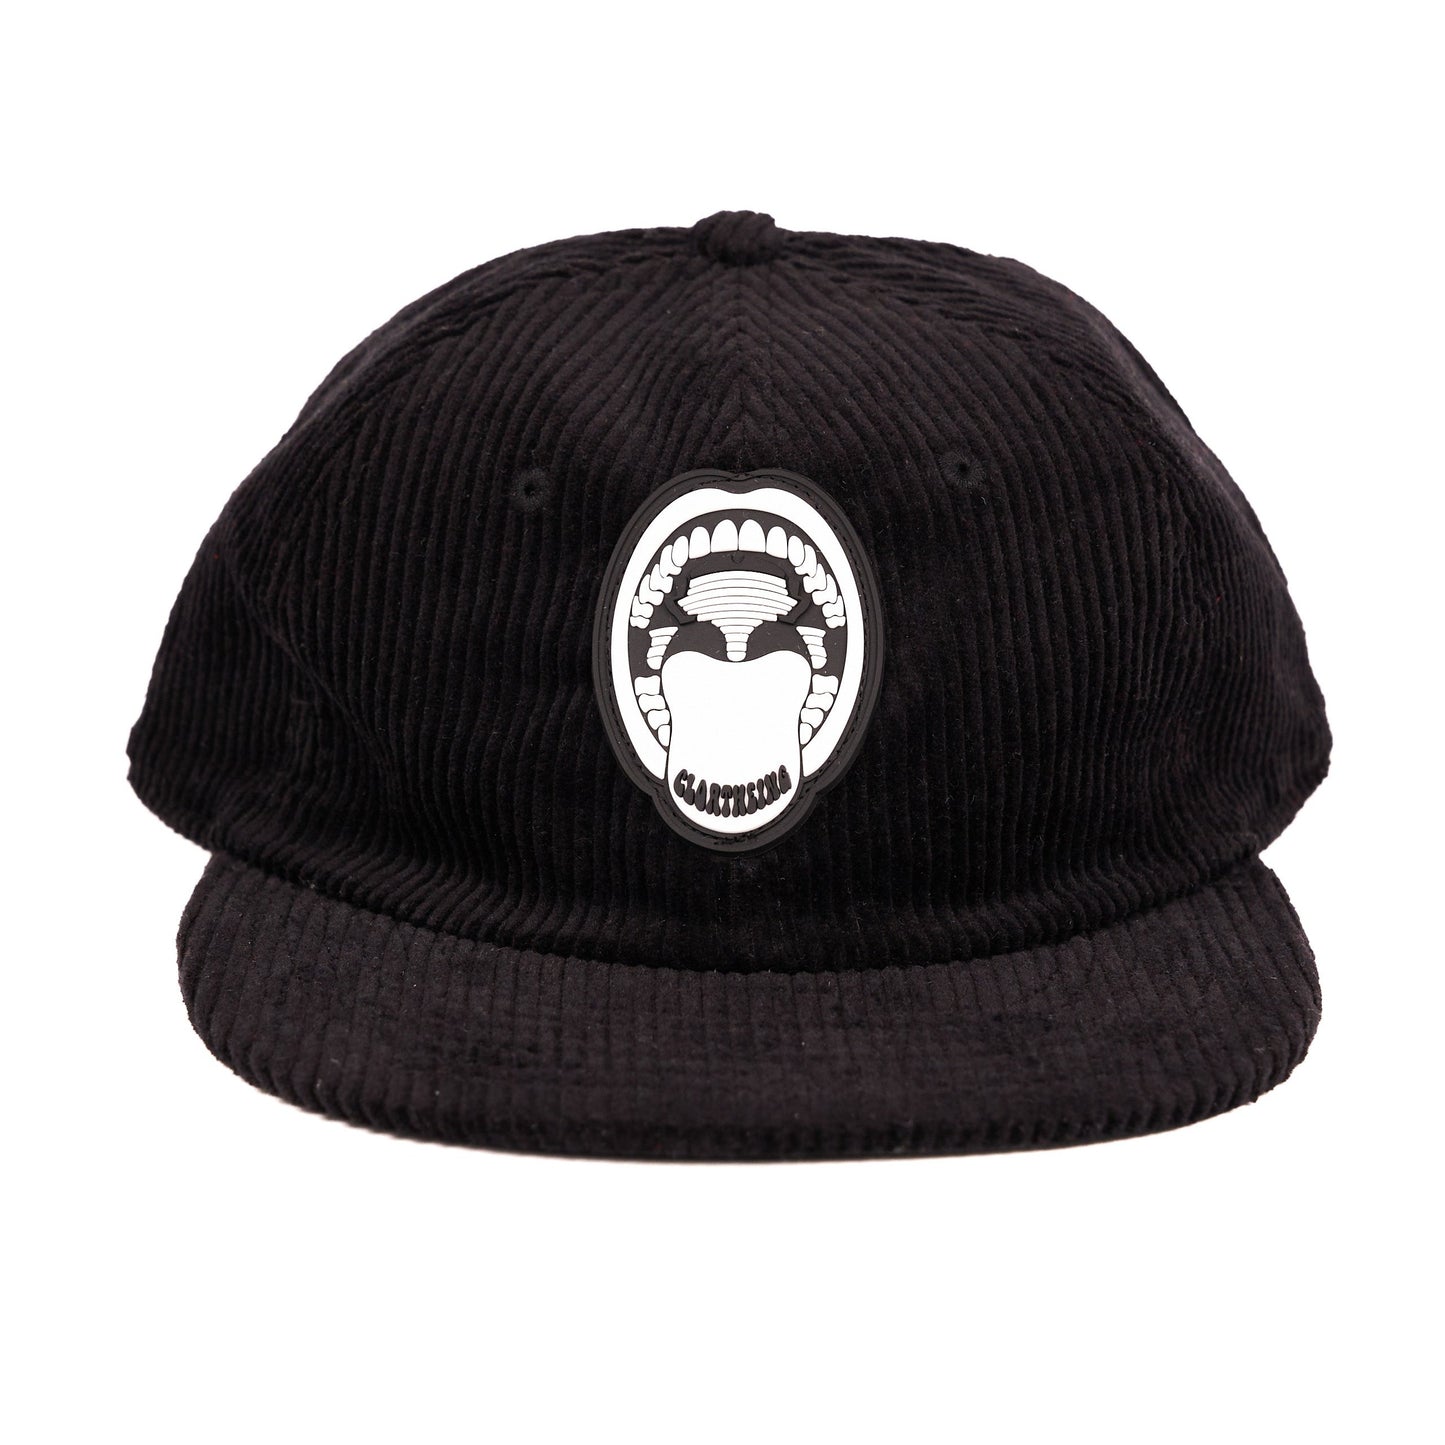 Mouth-Peace Hat - Black Cord